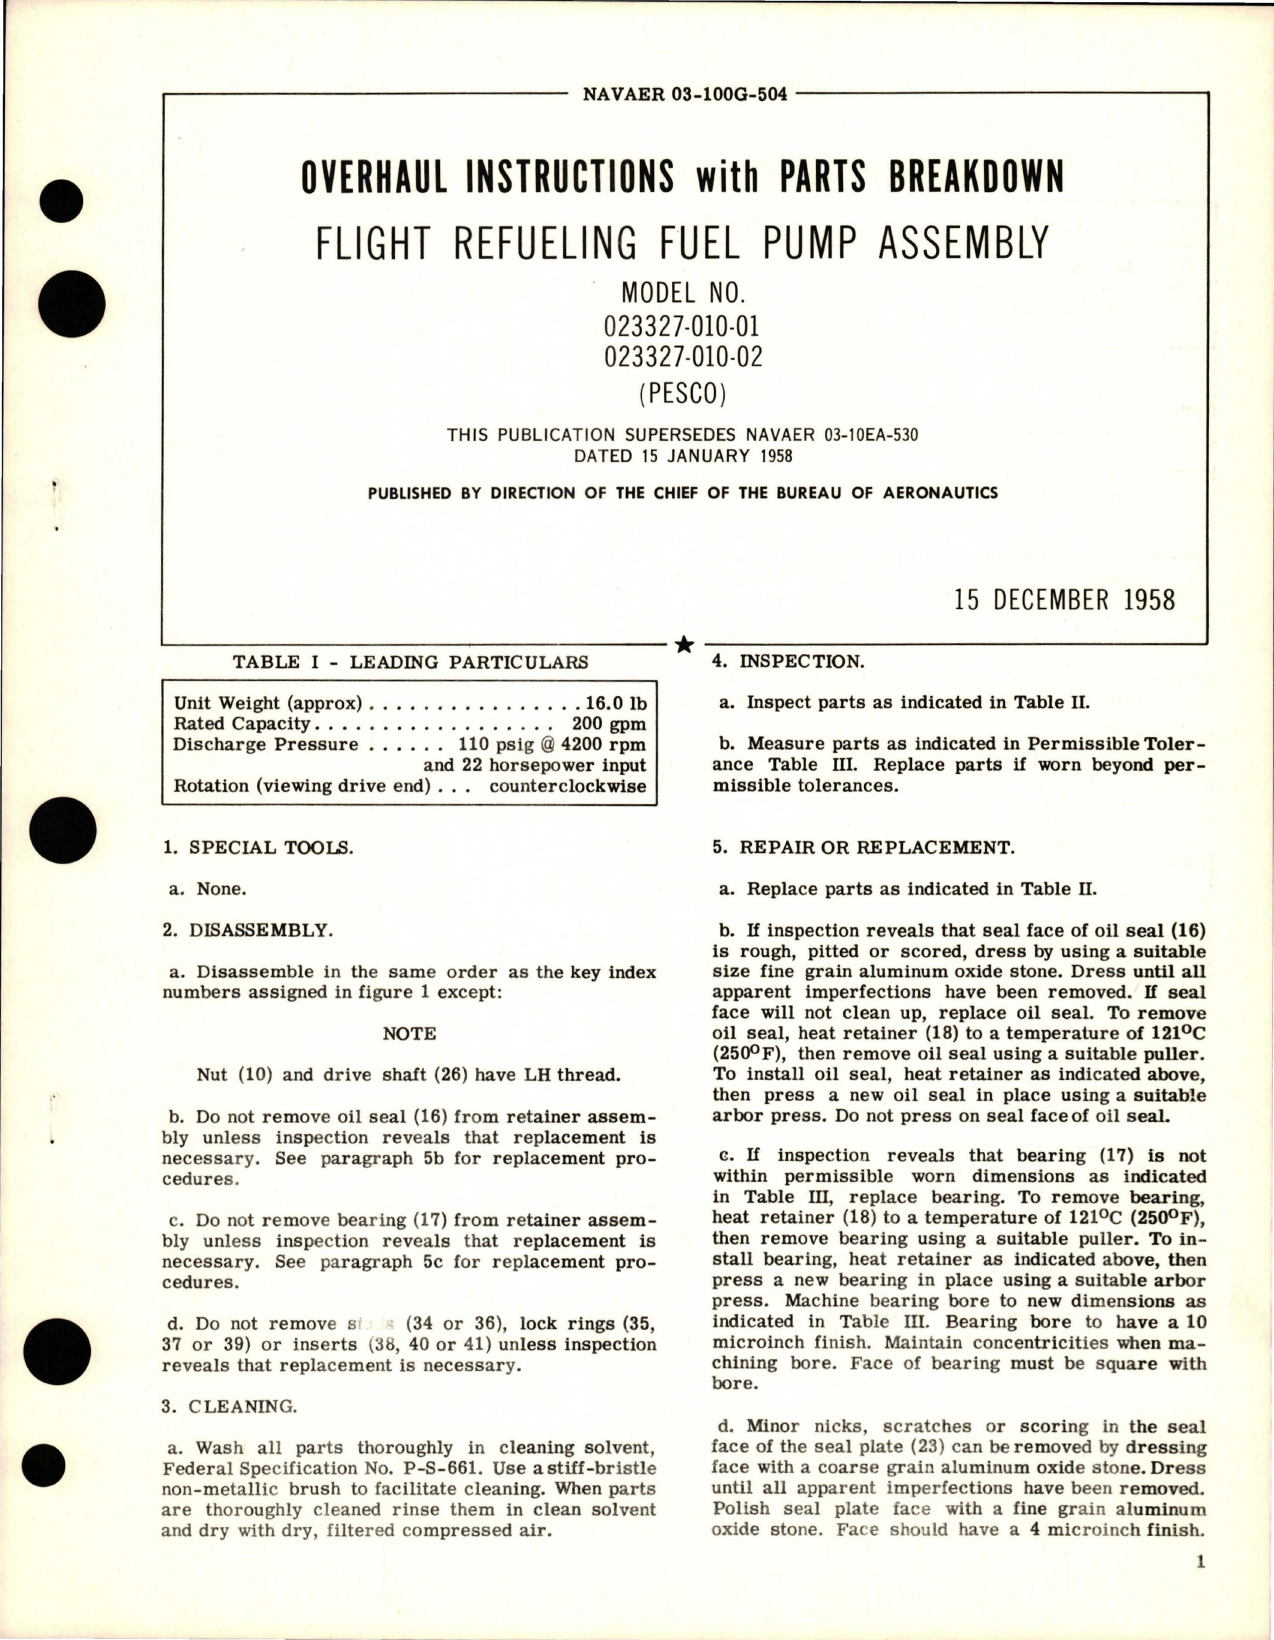 Sample page 1 from AirCorps Library document: Overhaul Instructions with Parts Breakdown for Flight Refueling Fuel Pump Assembly - Models 023327-010-01 and 023327-010-02 